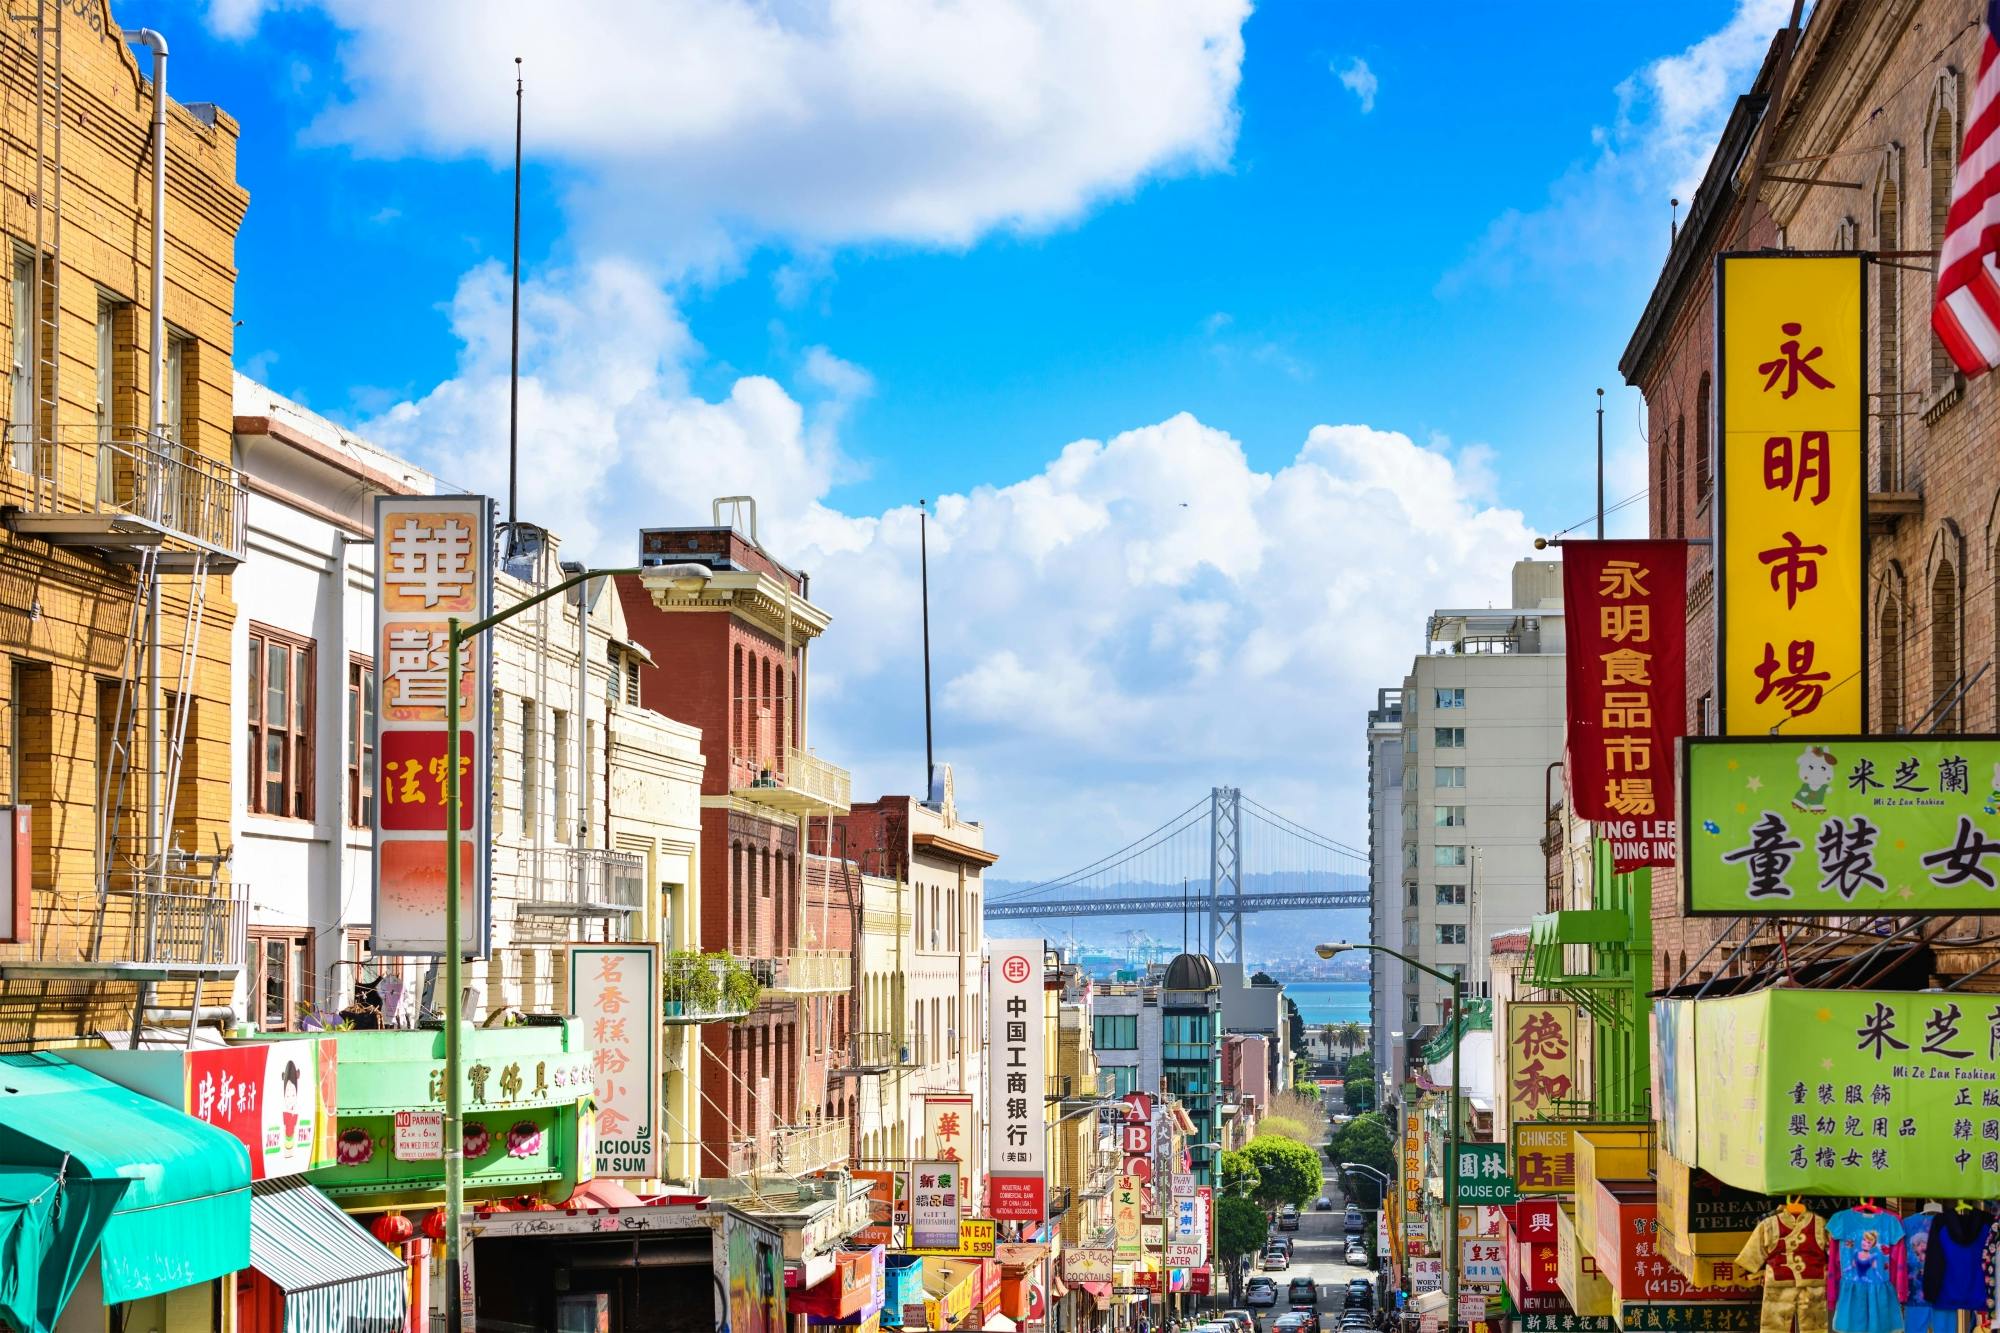 Tour San Francisco Chinatown in The Warrior Cat Exploration Game